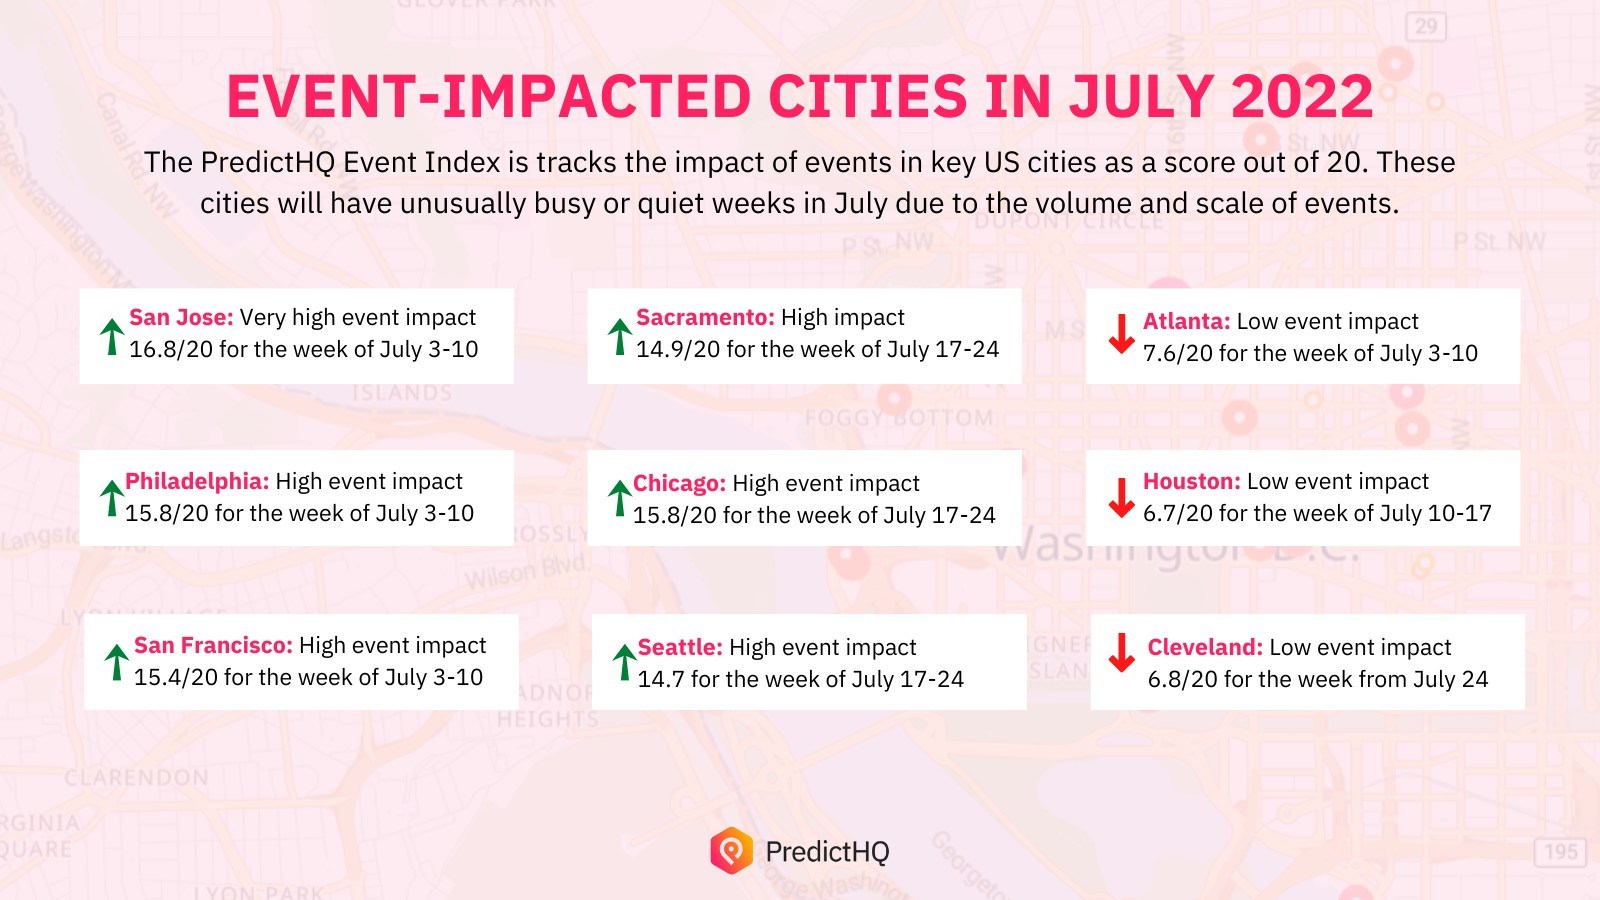 Upcoming event impact in July: these cities will be the most impacted by significant surges or lulls in major events.